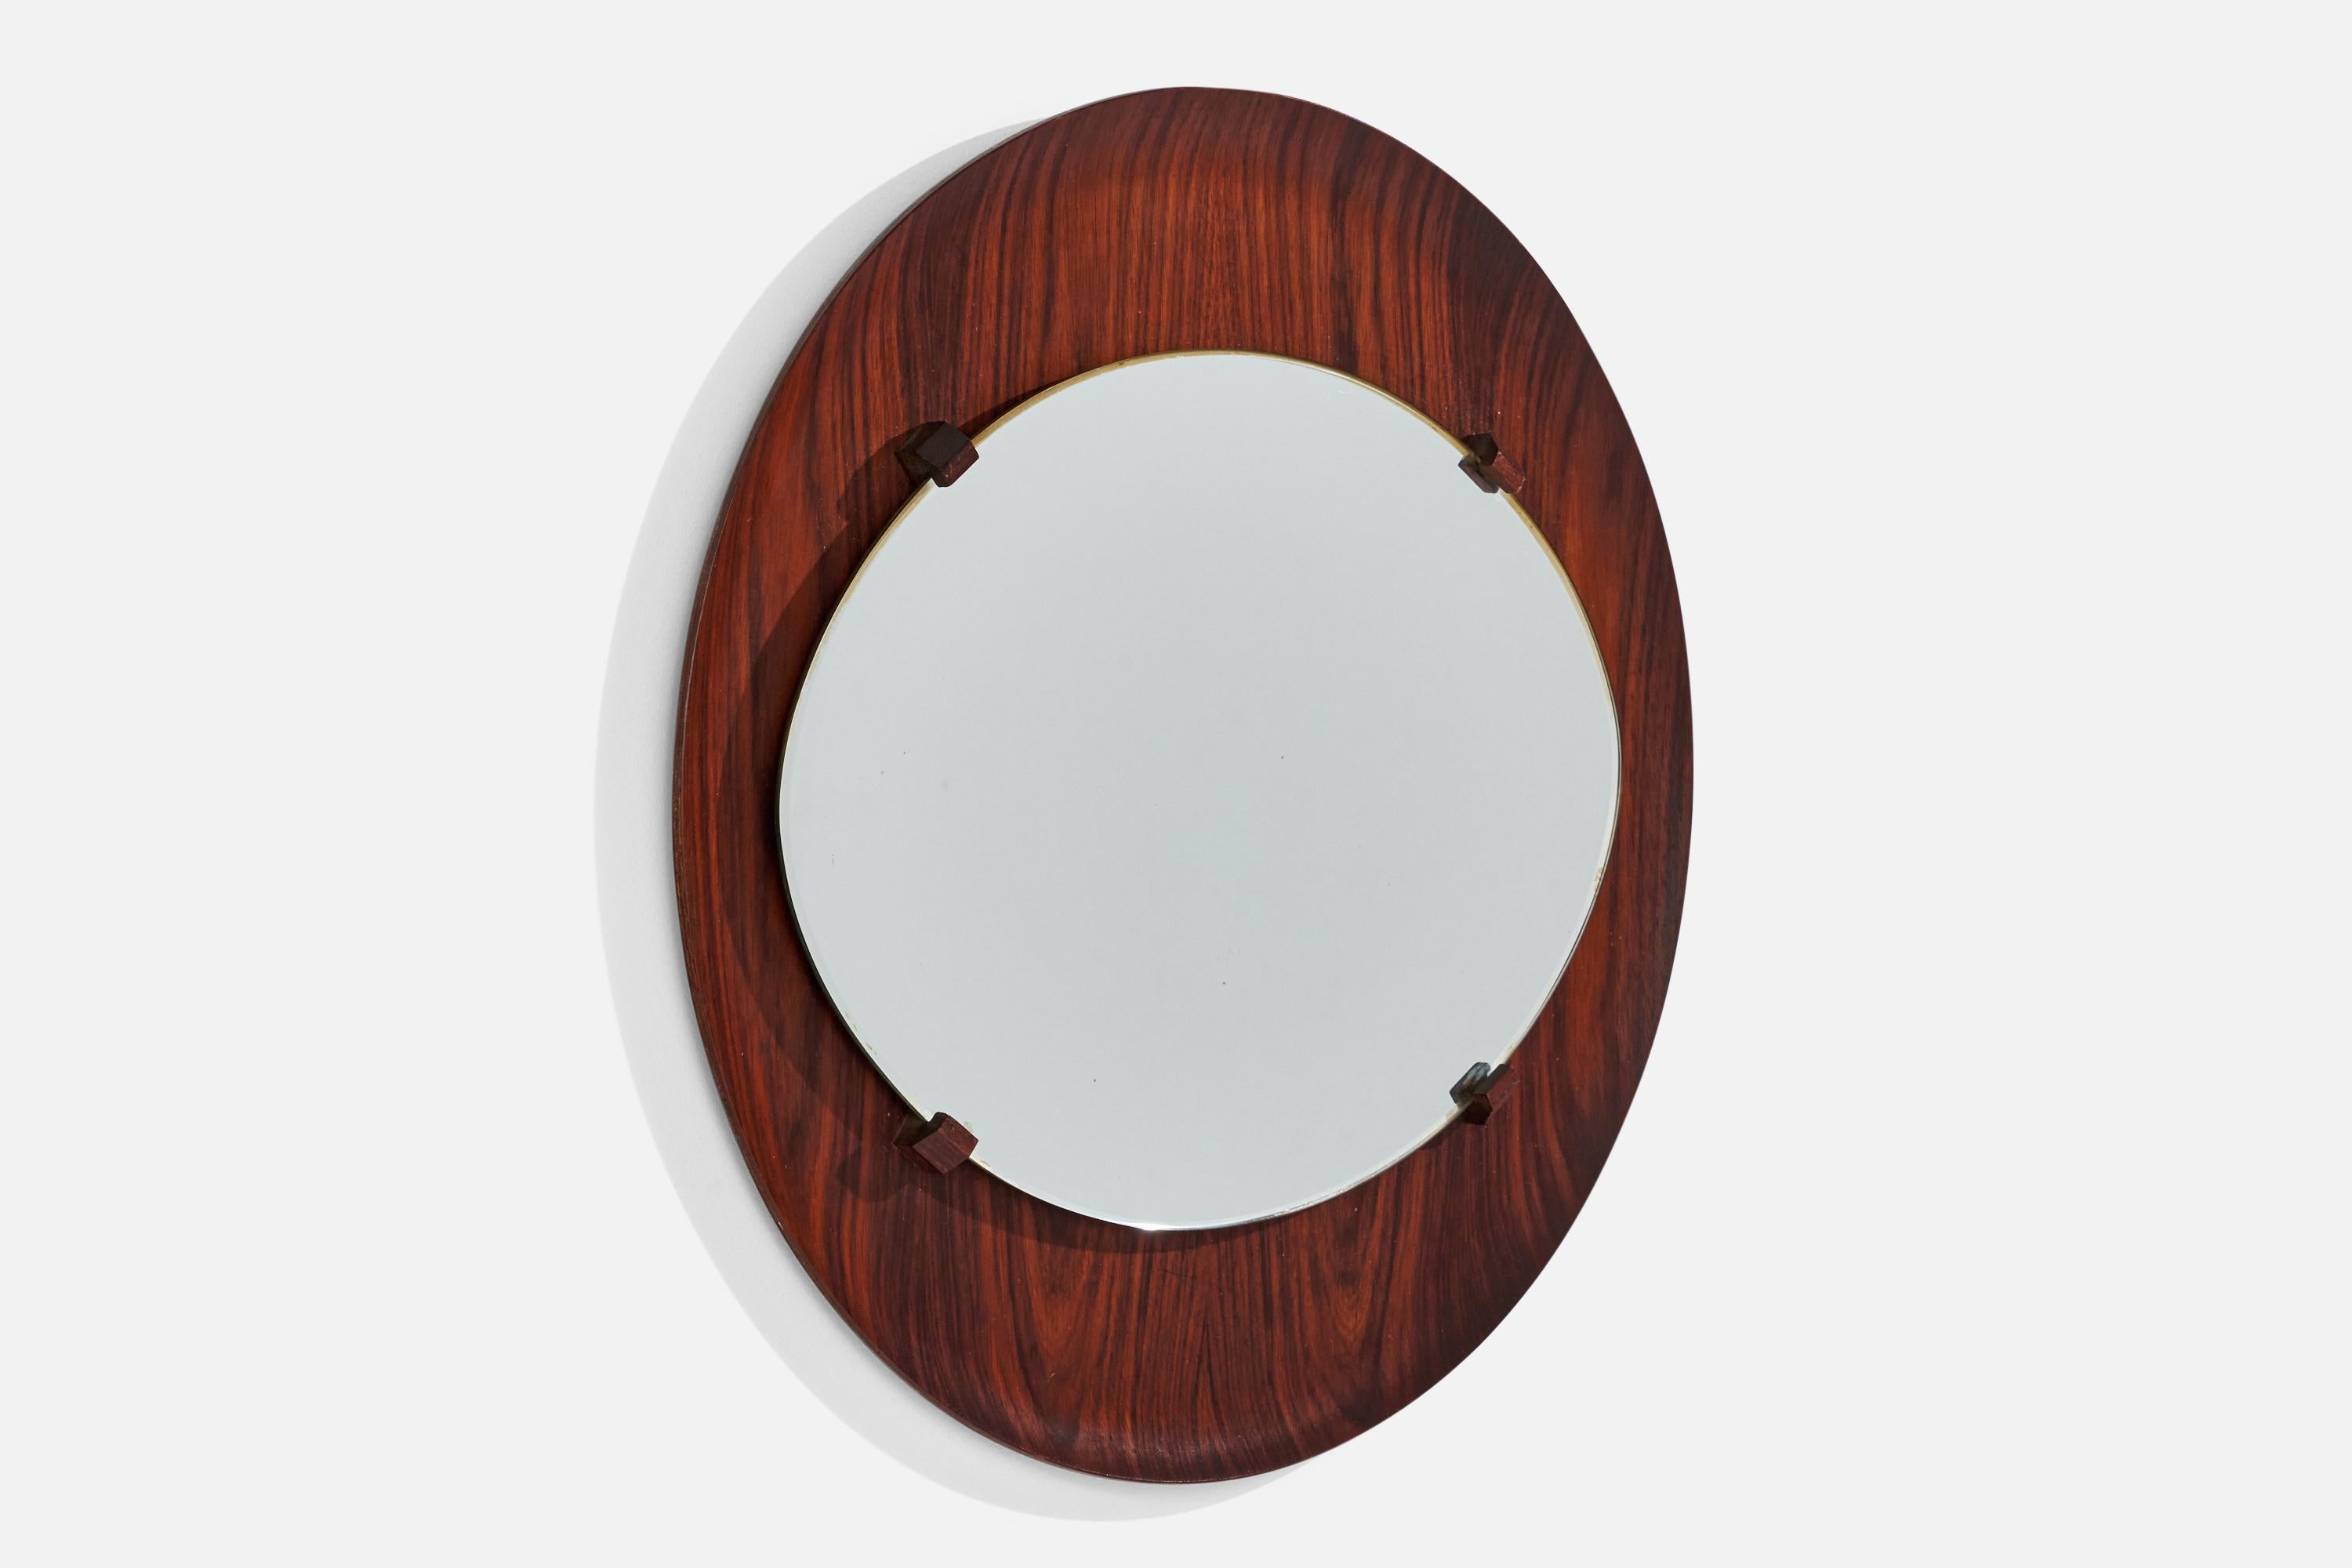 Campo & Graffi 'Attributed', Wall Mirror, Rosewood, Mirror Glass, Italy, 1950s For Sale 1